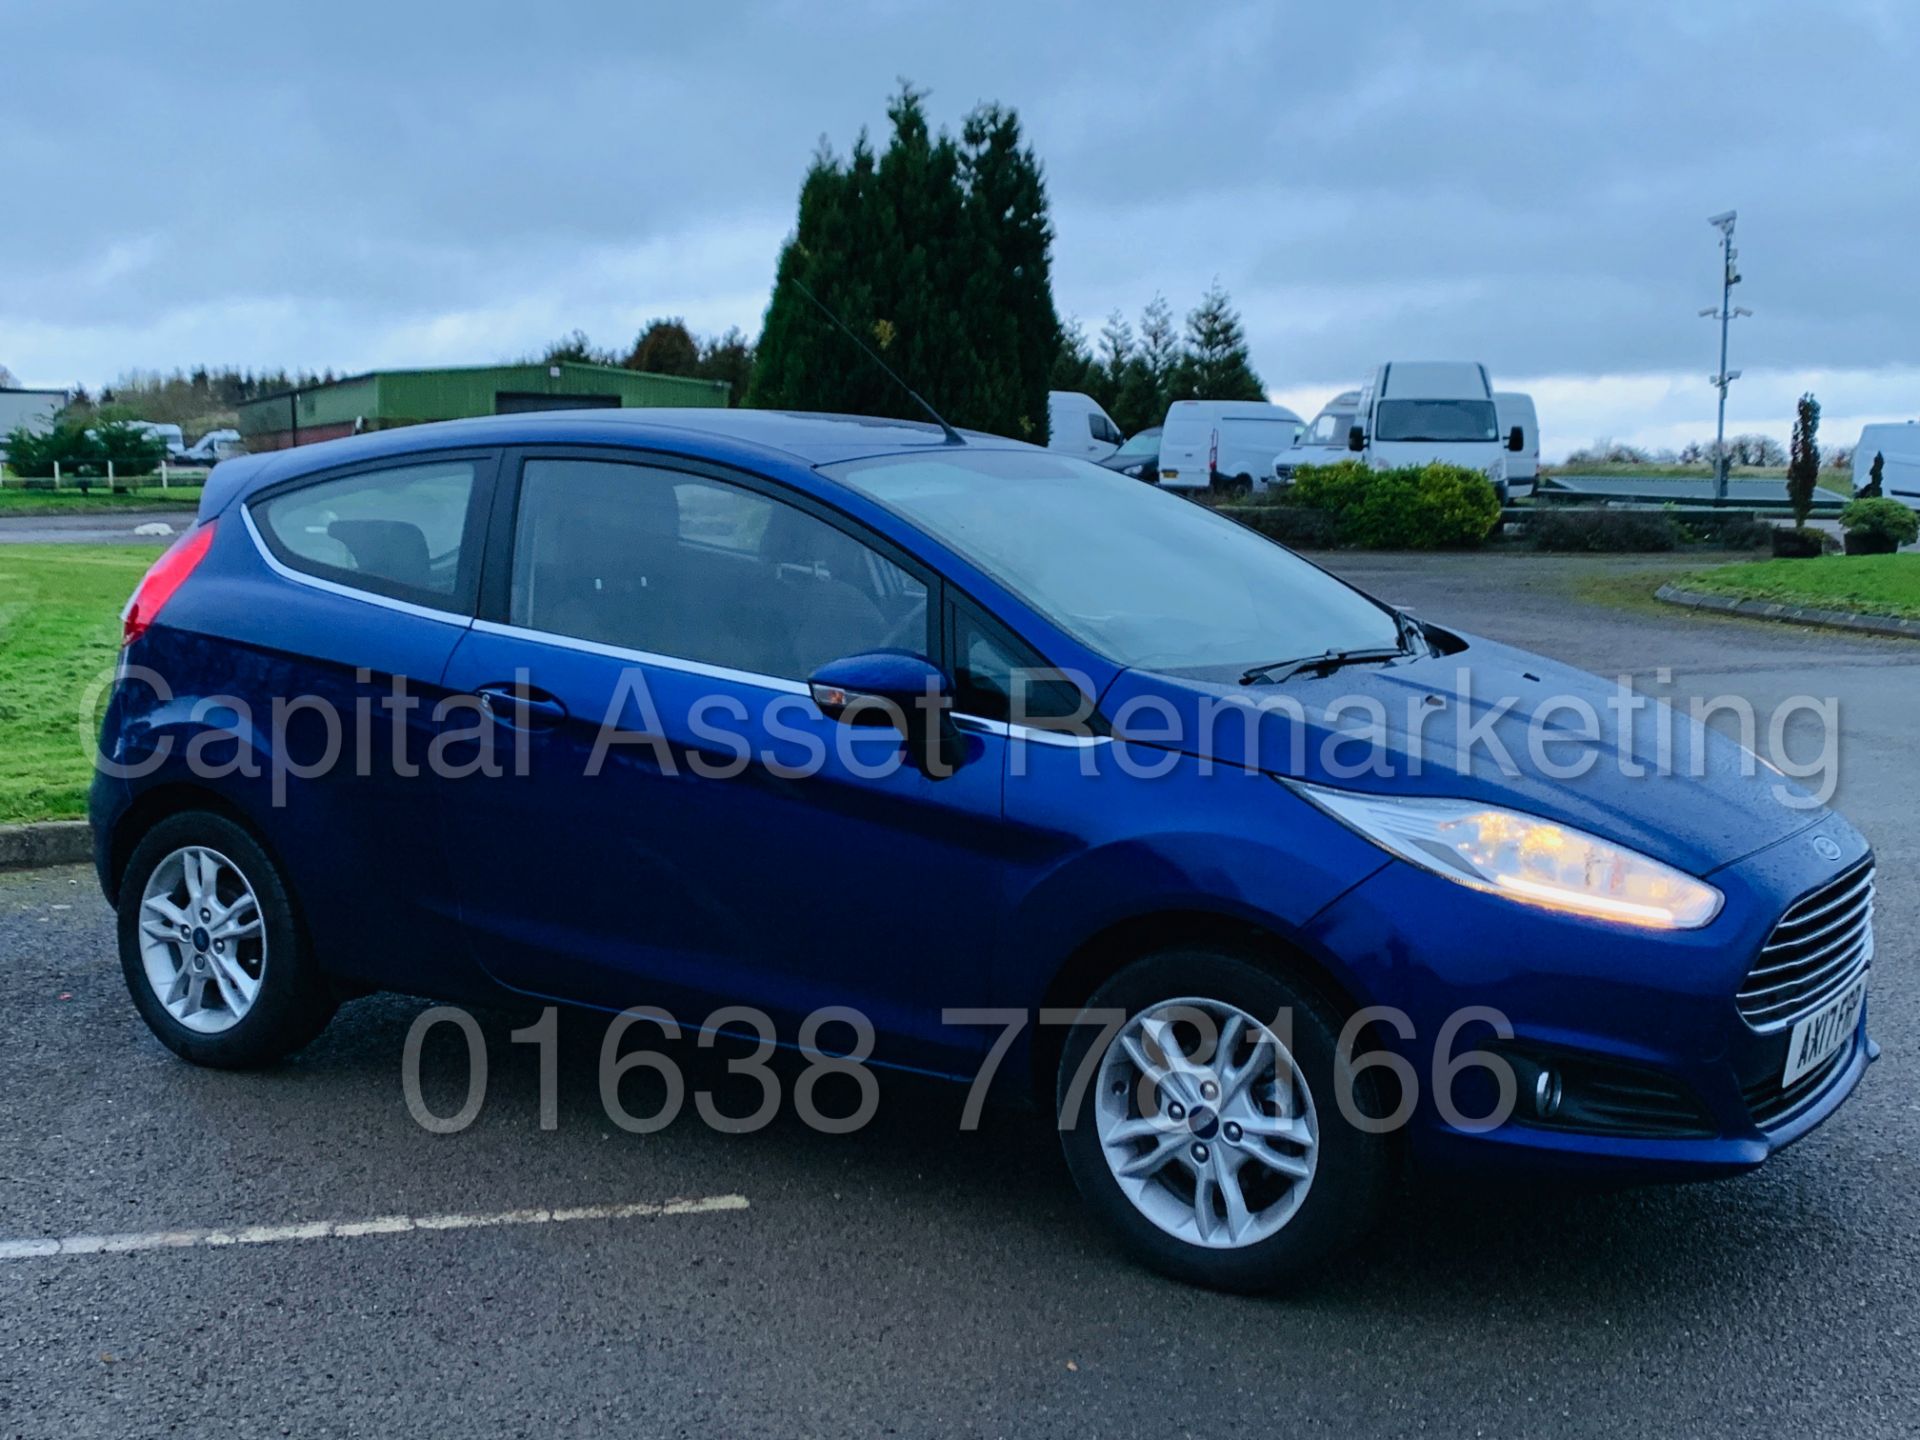 (On Sale) FORD FIESTA *ZETEC EDITION* (2017) '1.2 PETROL - 5 SPEED' *AIR CON & SAT NAV* 17,000 MILES - Image 9 of 40